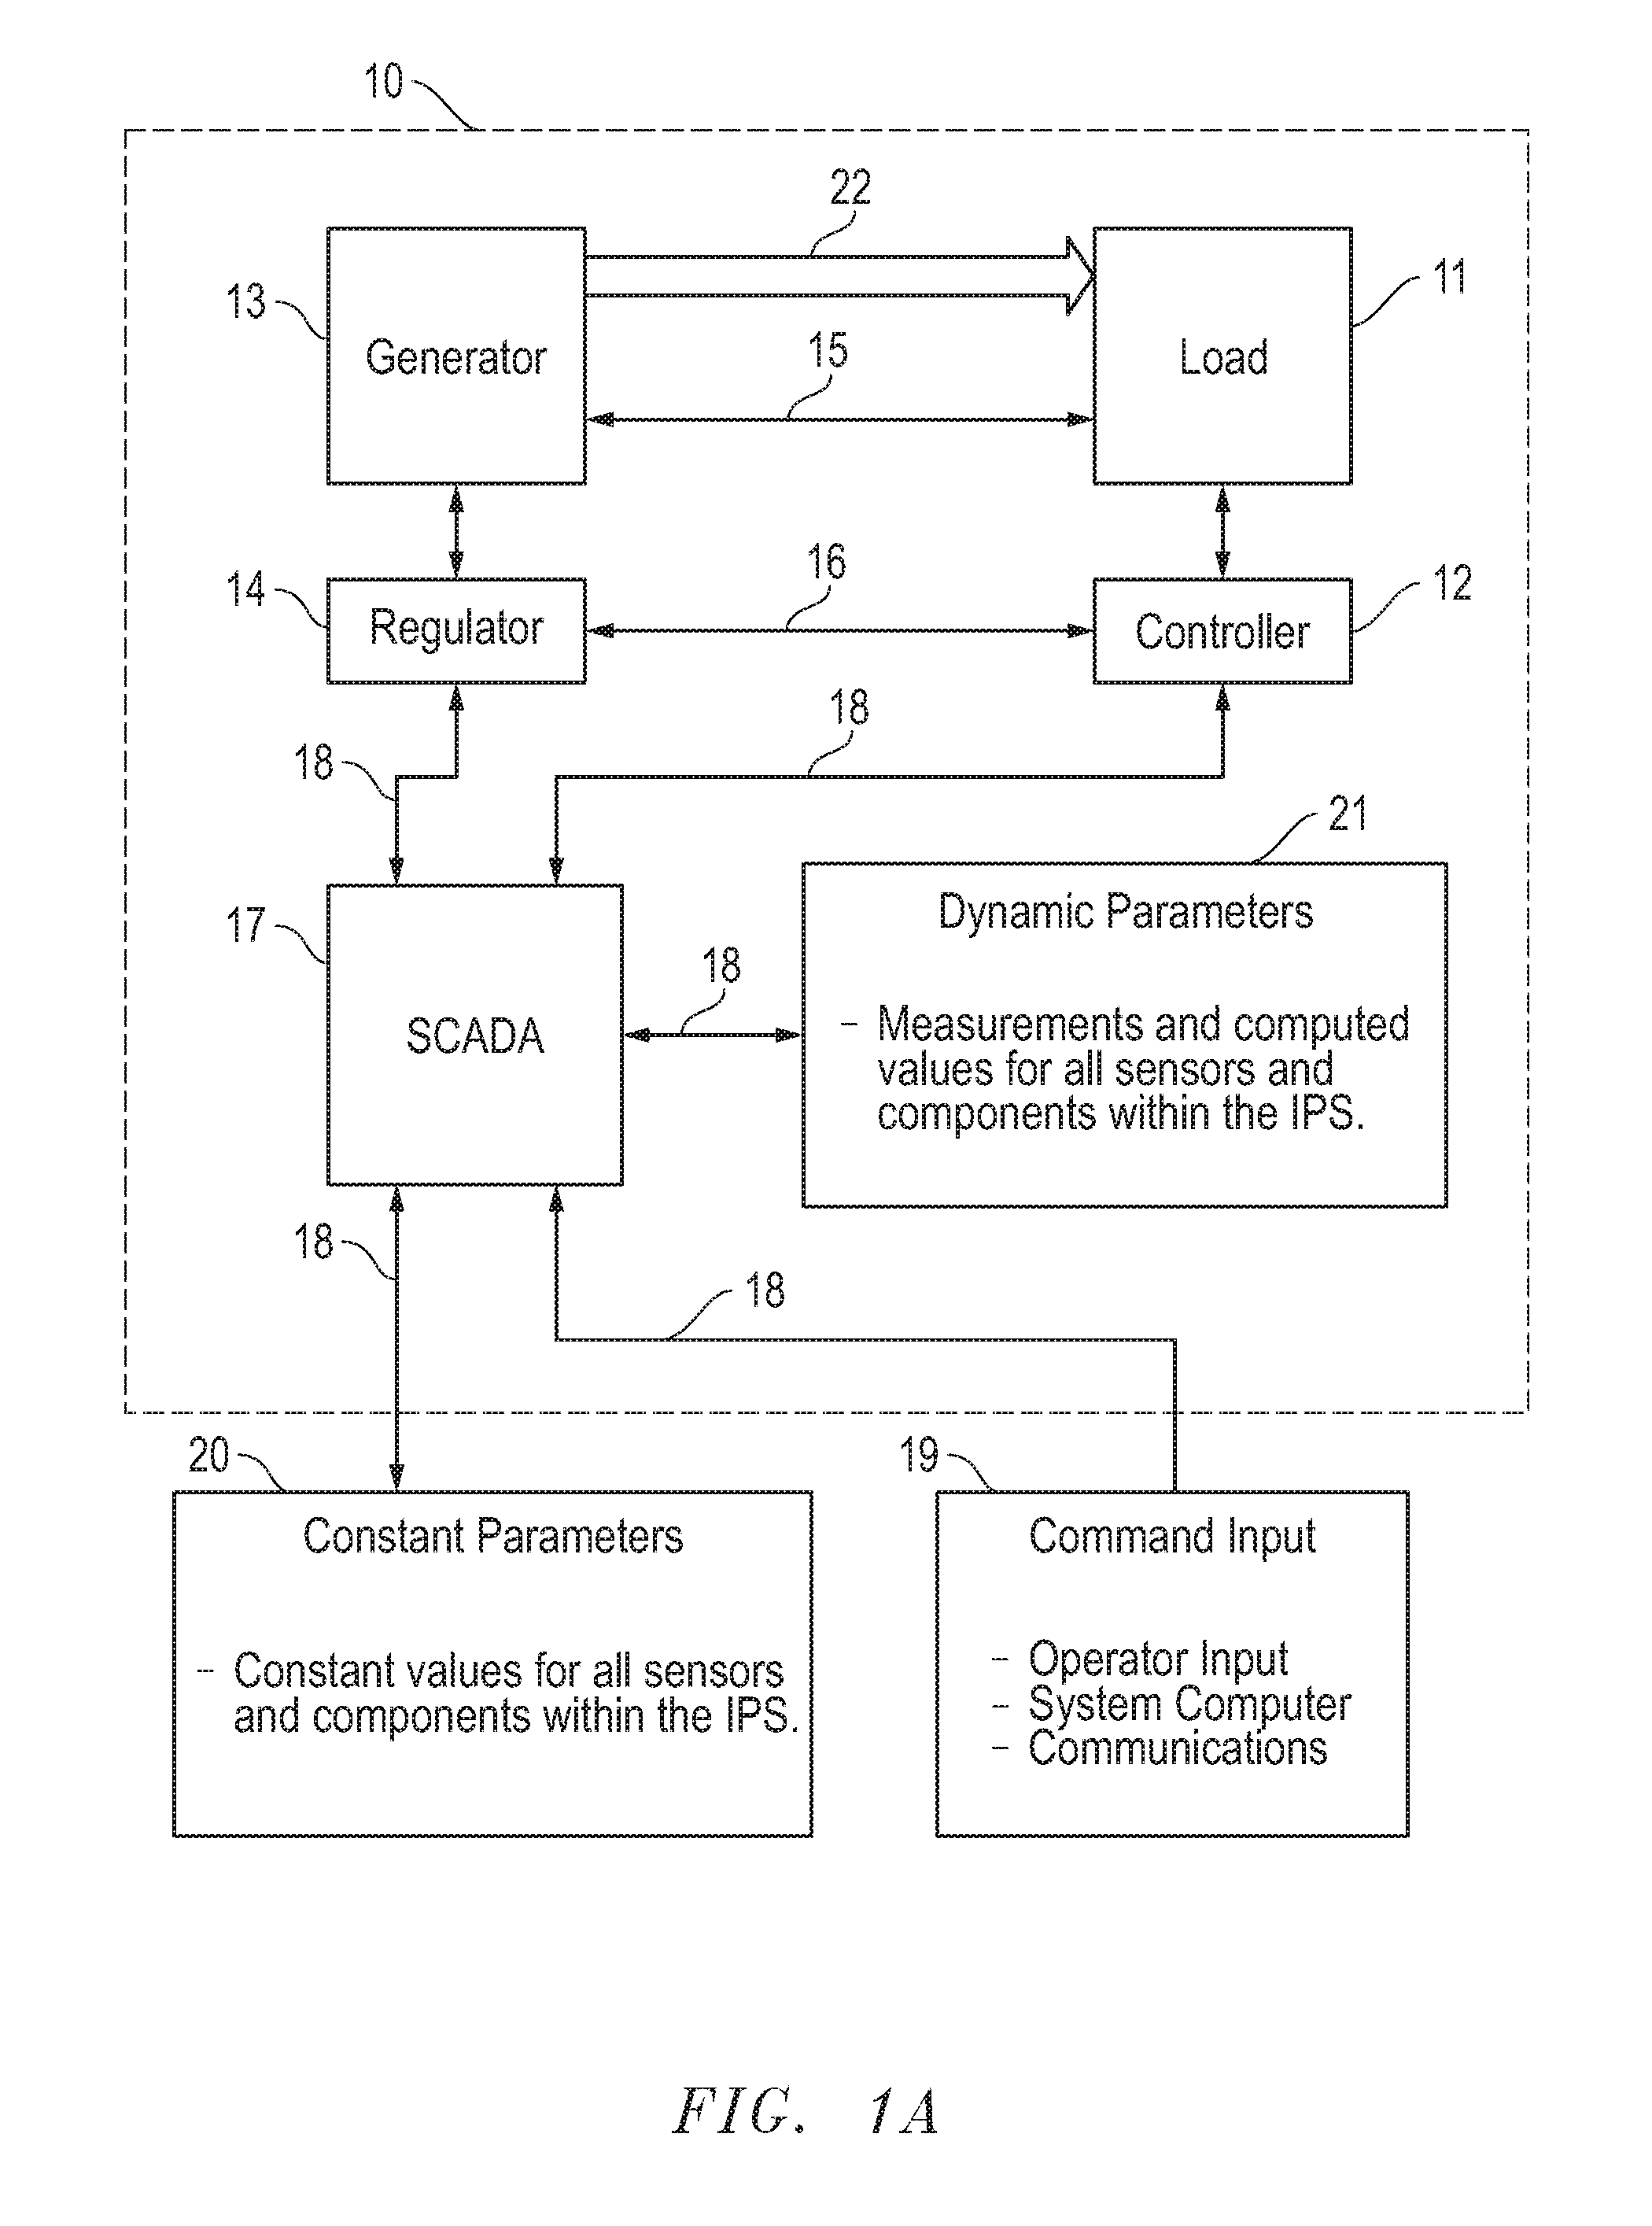 Motor controller with externally adjustable power rate constraints